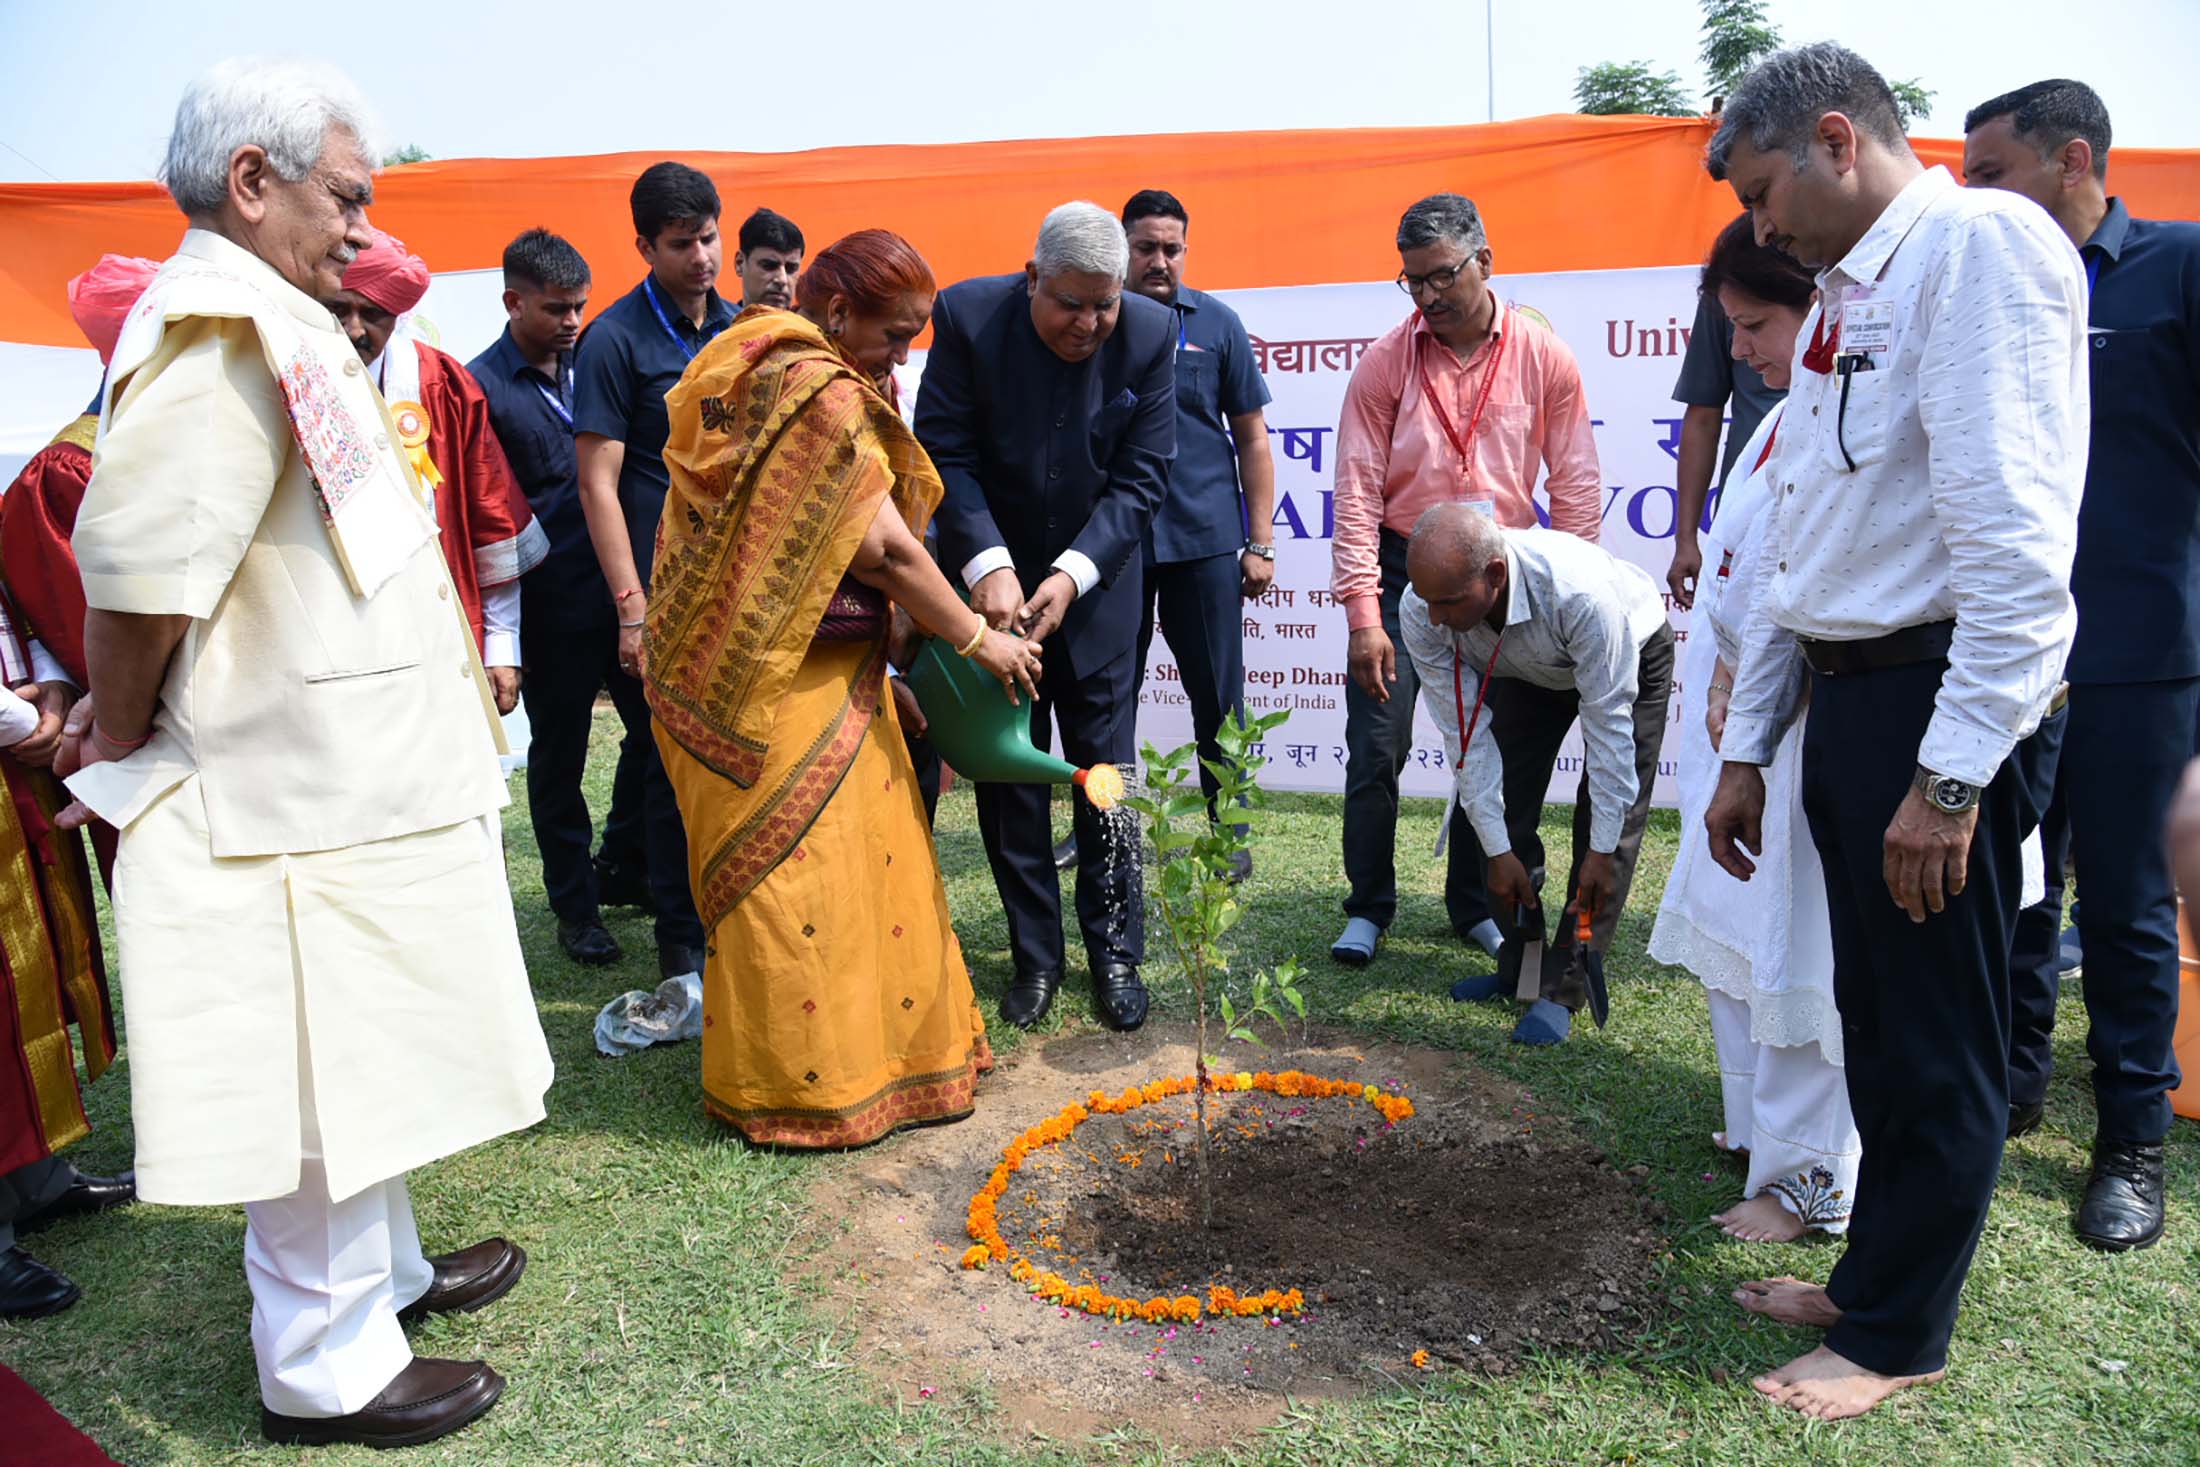 The Vice President, Shri Jagdeep Dhankhar and Dr. Sudesh Dhankhar planting a sapling at the premises of University of Jammu, in Union Territory of Jammu and Kashmir on June 22, 2023.